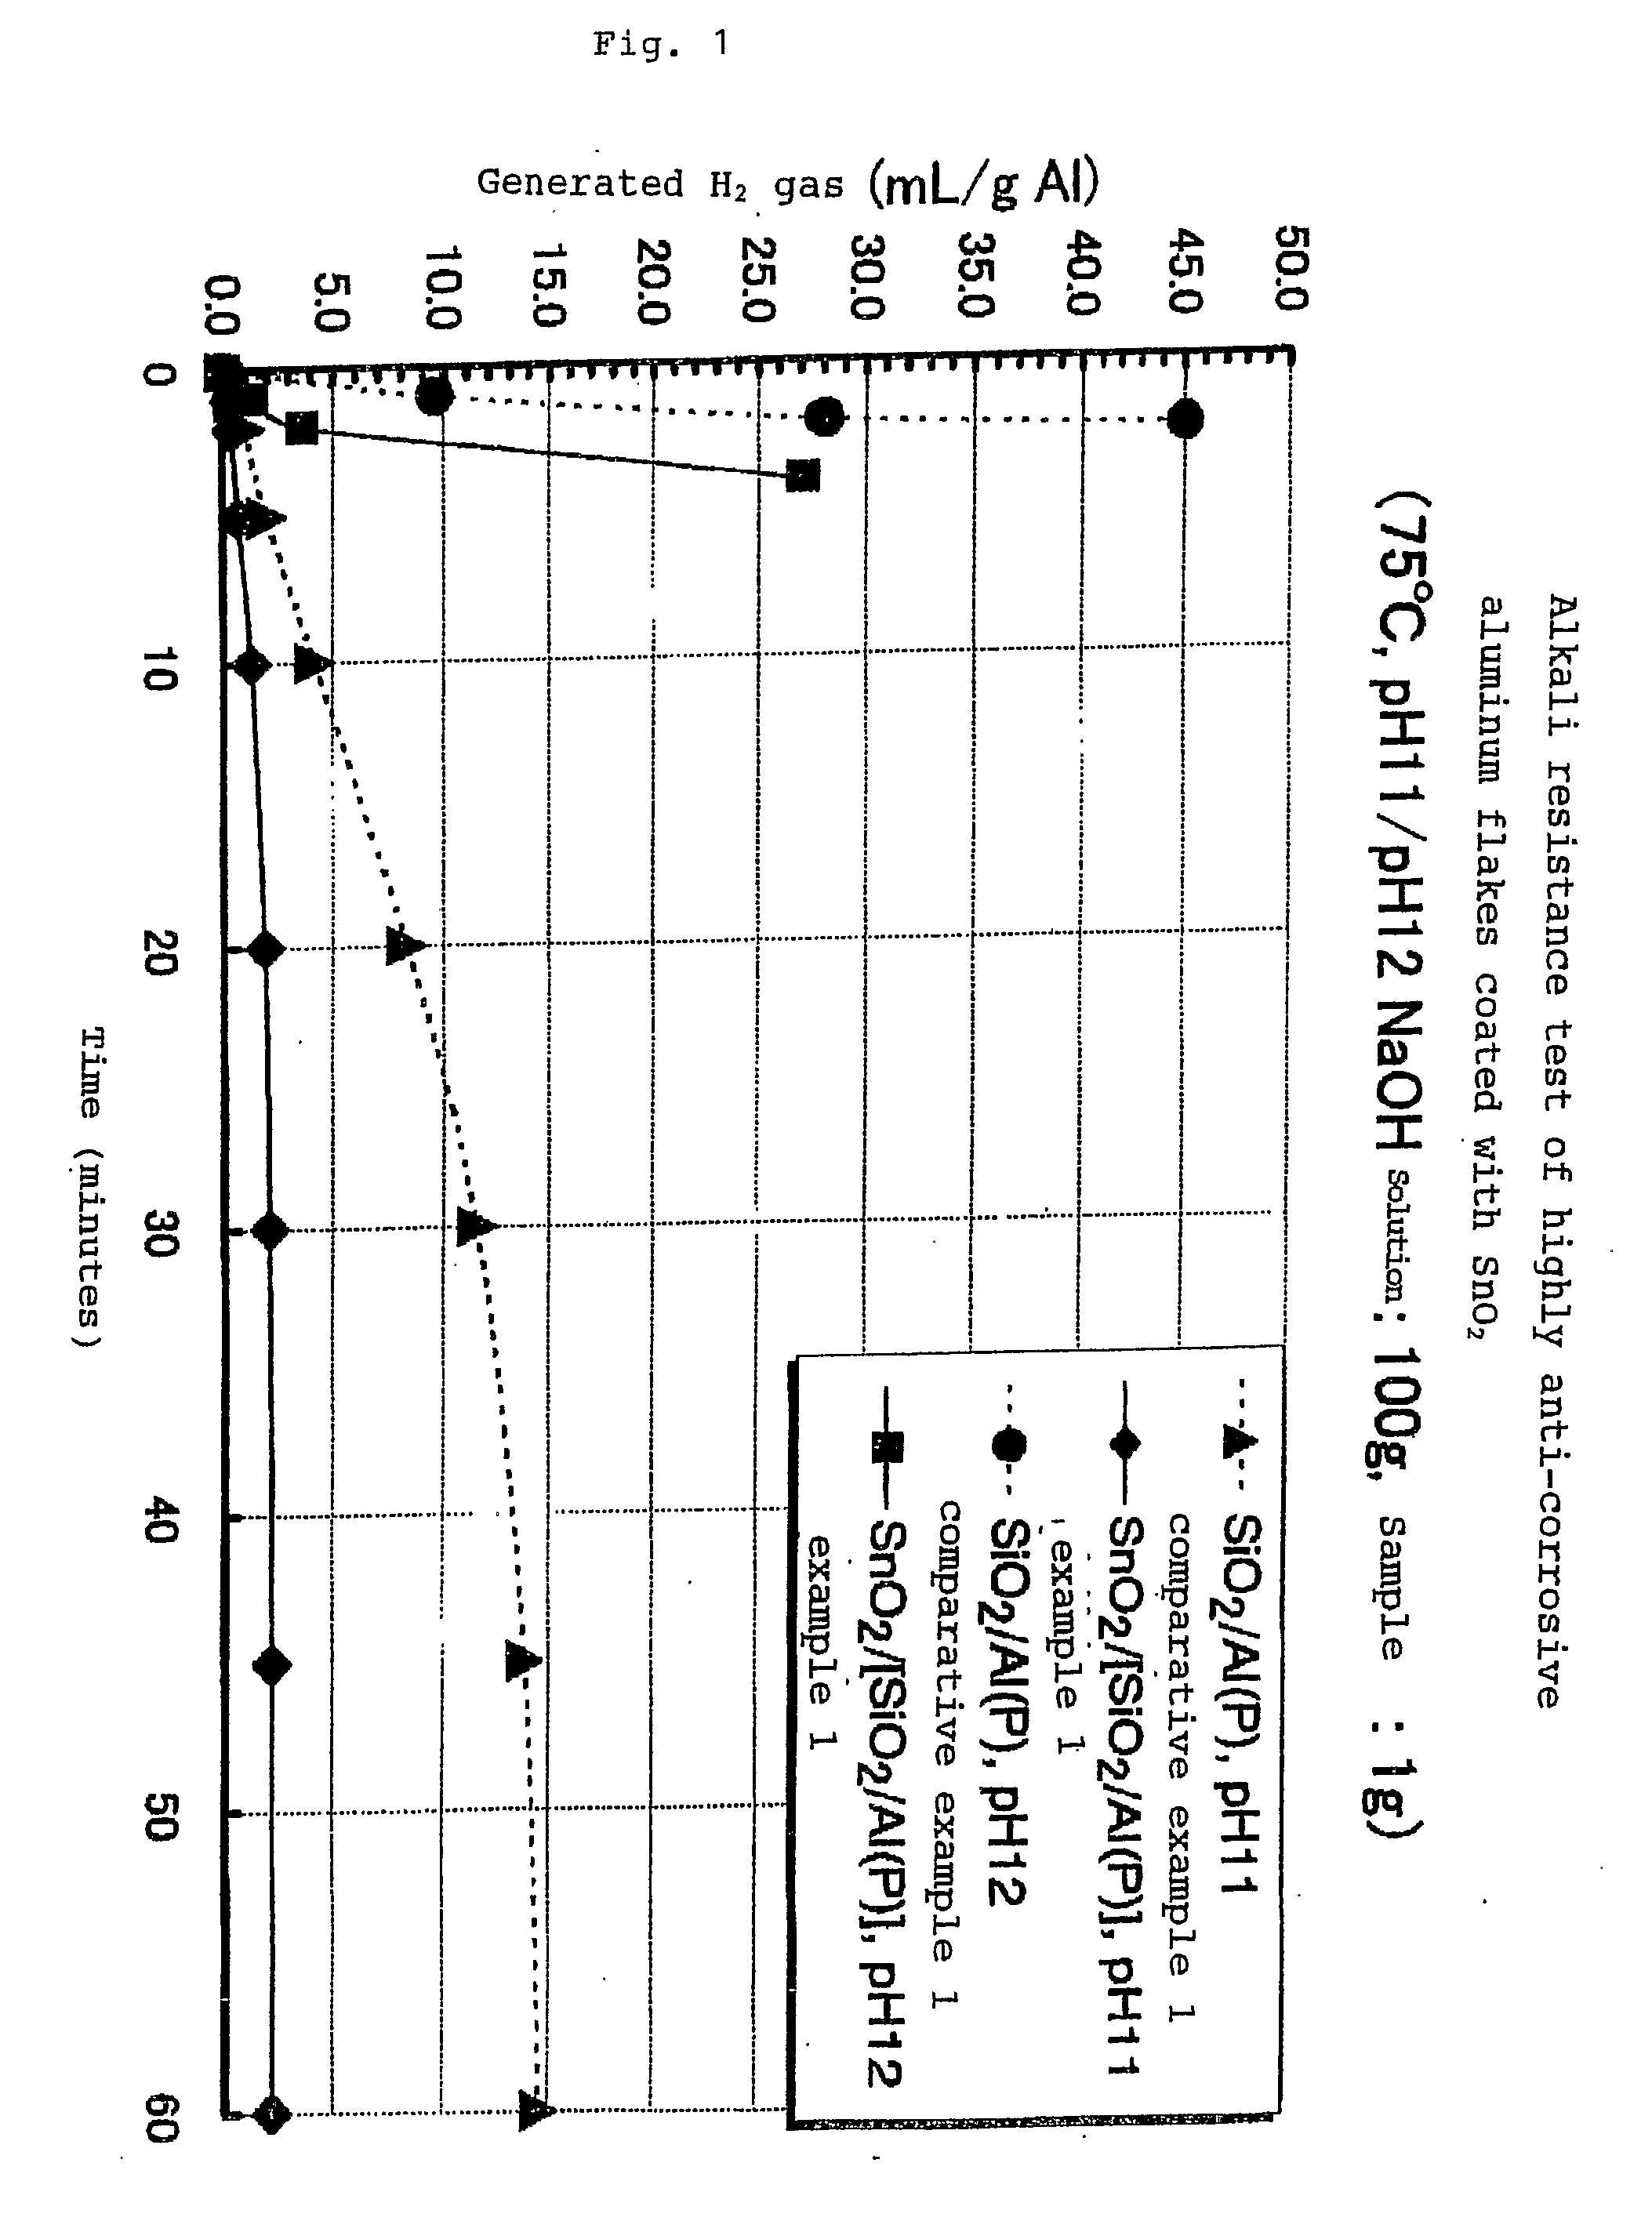 Highly Anti-Corrosive Thin Platelet-Like Metal Pigments, Preparing Method of the Same, and Colored Interference Pigments Having Metallic Luster Based on the Same